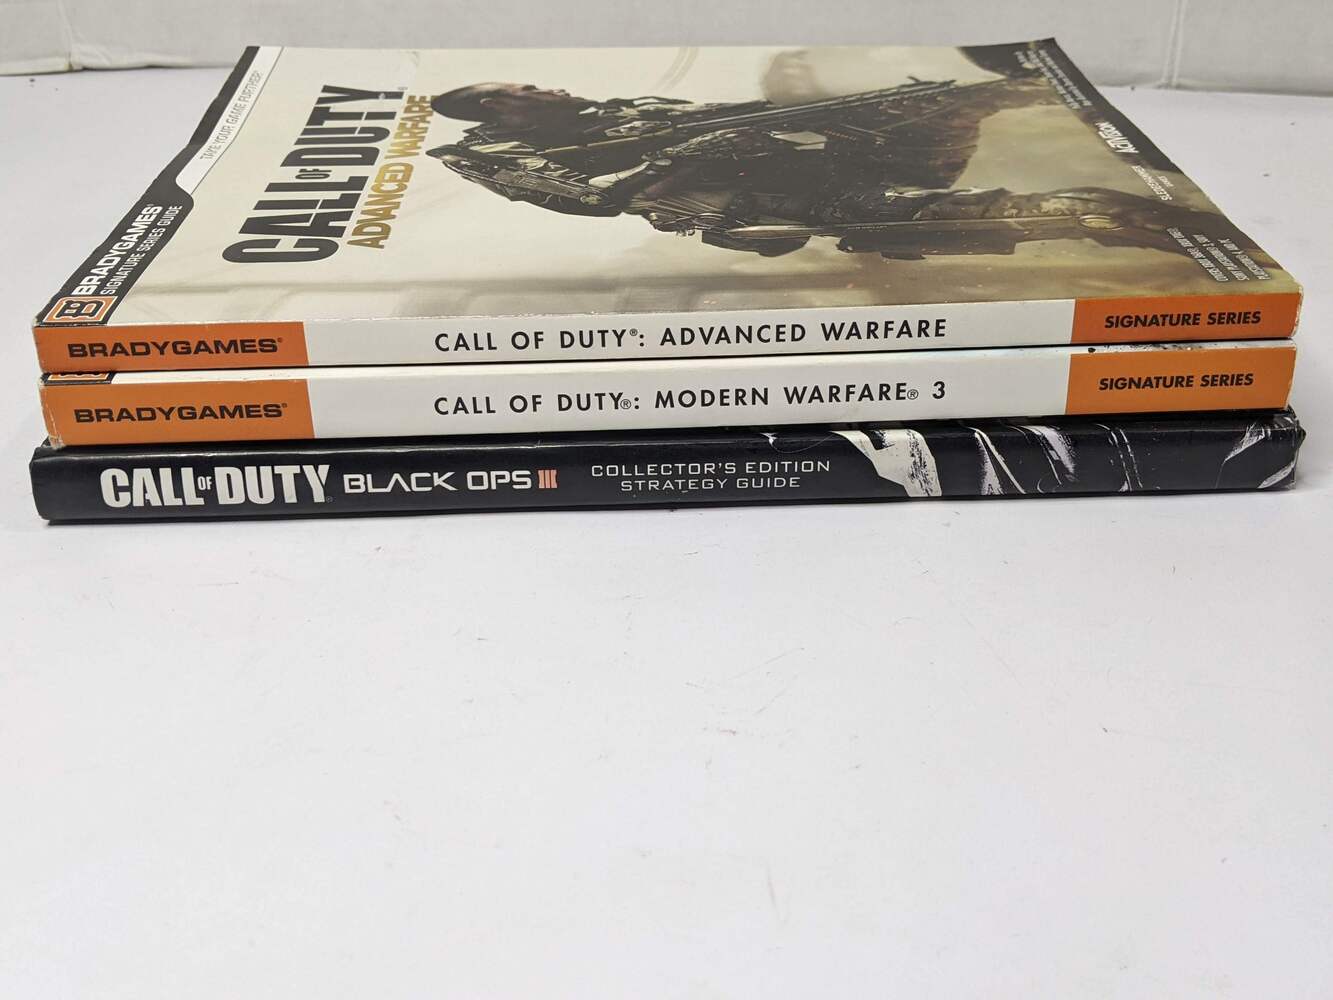 BradyGames Prima Games Call of Duty Signature Strategy Guide Books | Avenue  Shop Swap & Sell